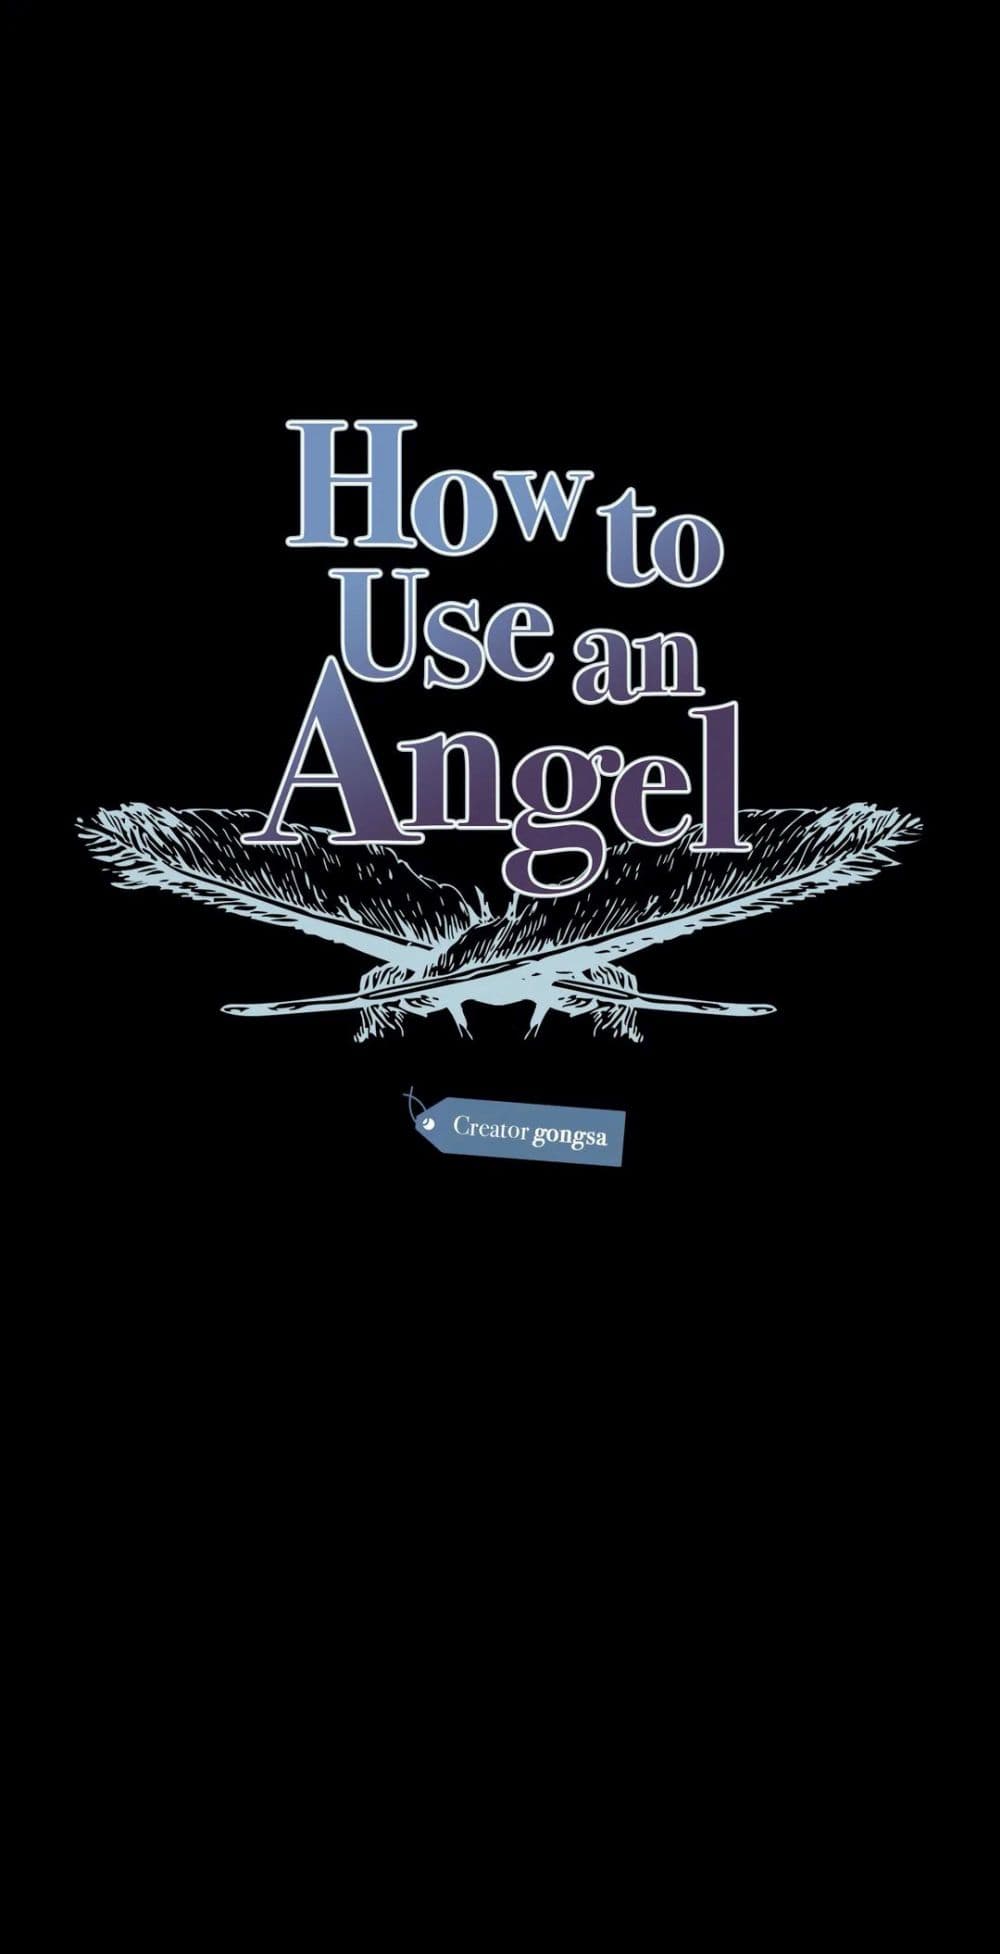 How to Use an Angel 24 (2)